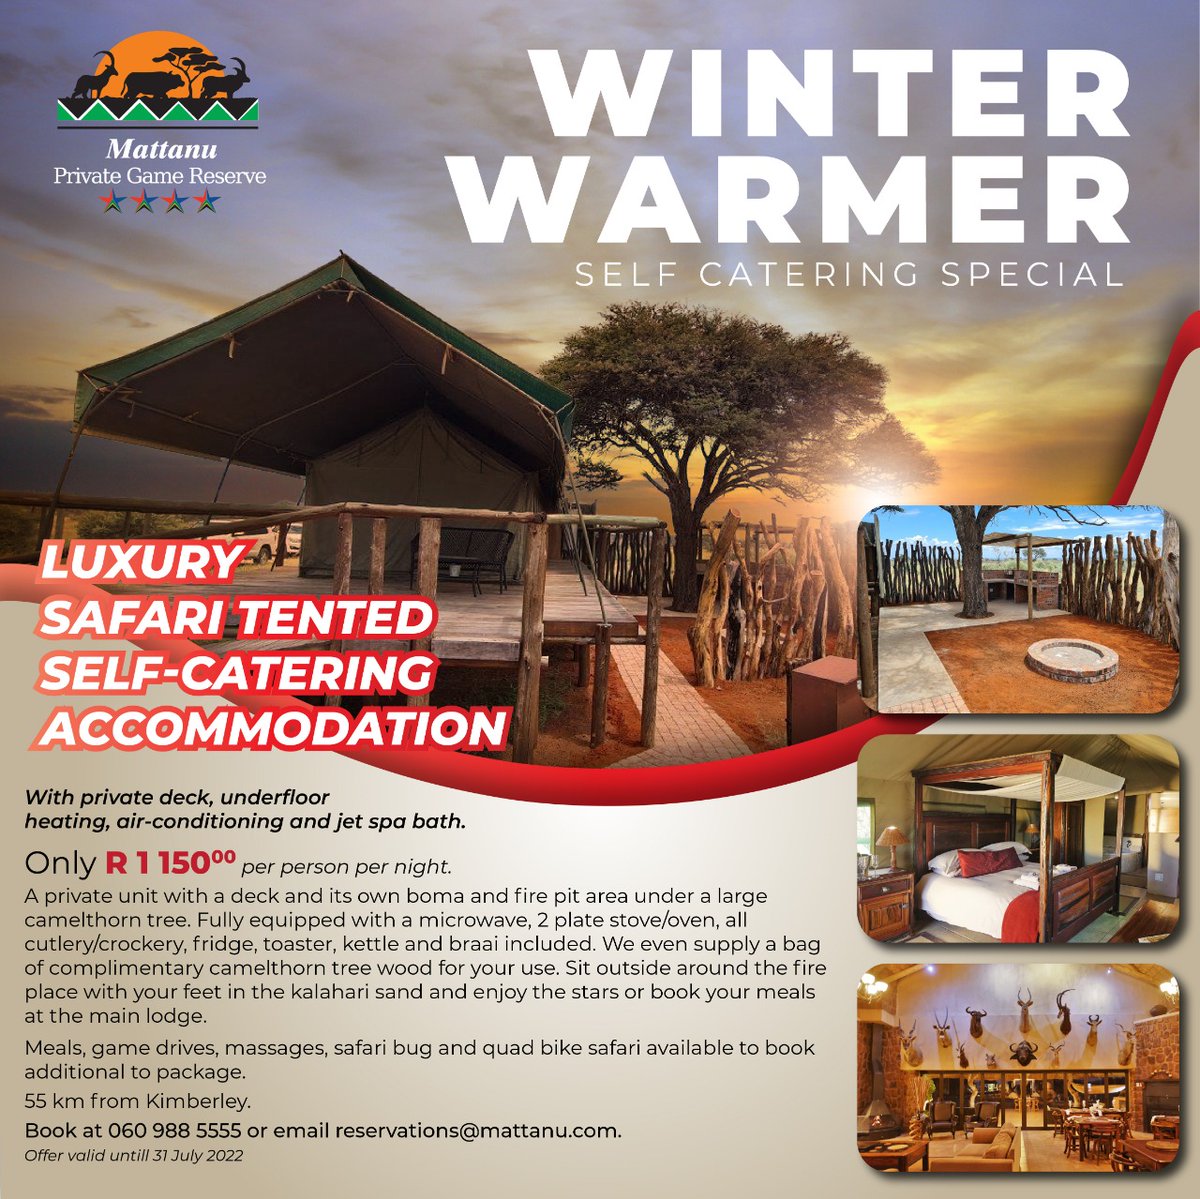 Don't miss the Mattanu Private Game Reserve special winter warmer offers #SoMuchMoreToFeel #NCBucketList.